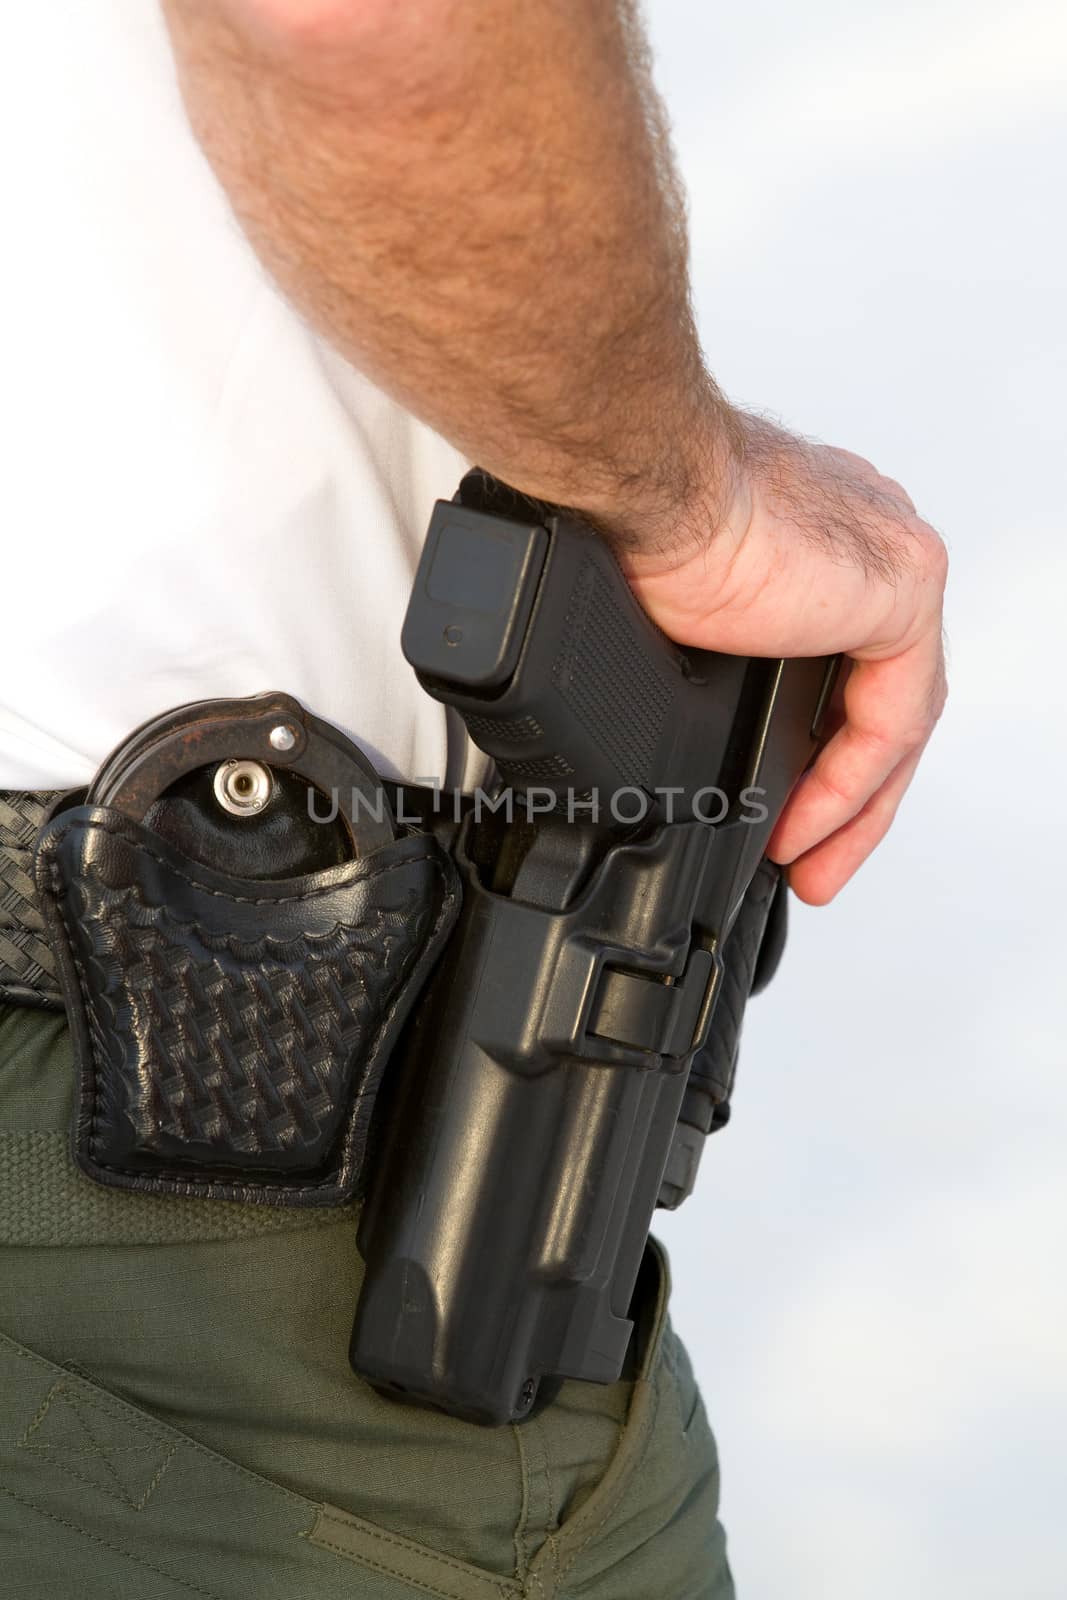 Police officer rests his hand on his weapon belt which also holds his handcuffs.